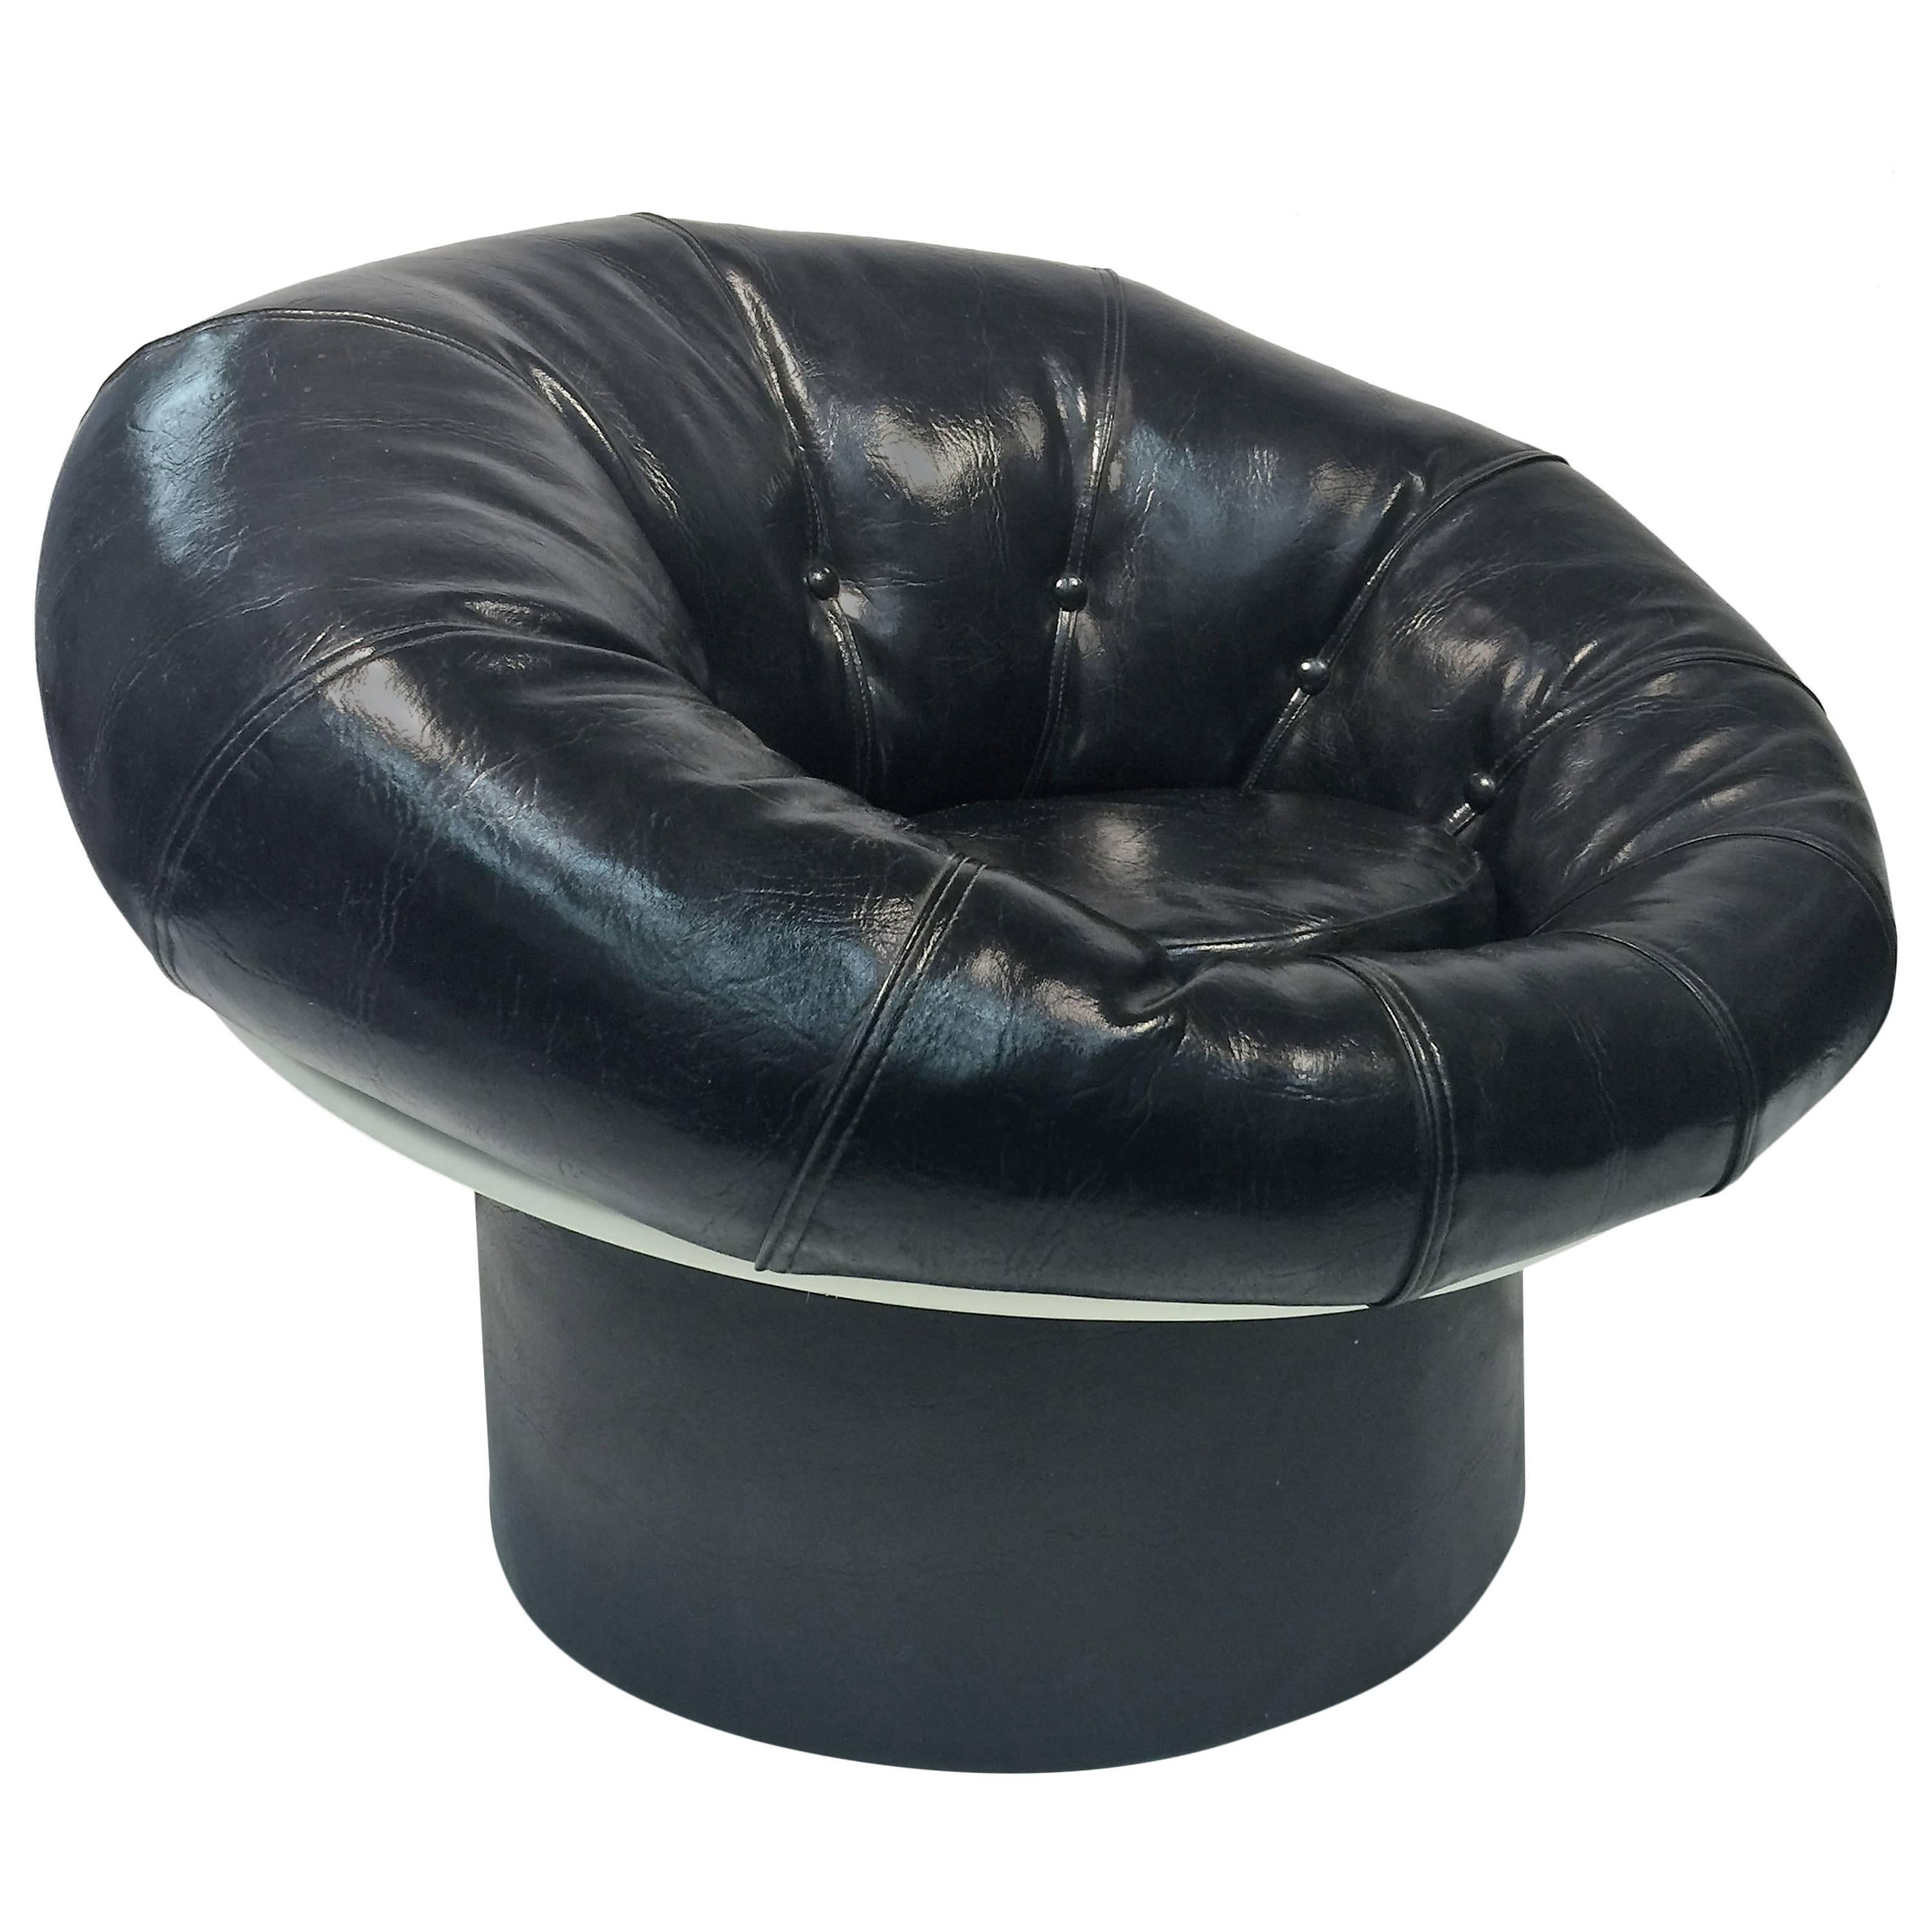 Mod Glossy Black Leatherette and Fiberglass Pouf Chair in Style of Joe Colombo For Sale